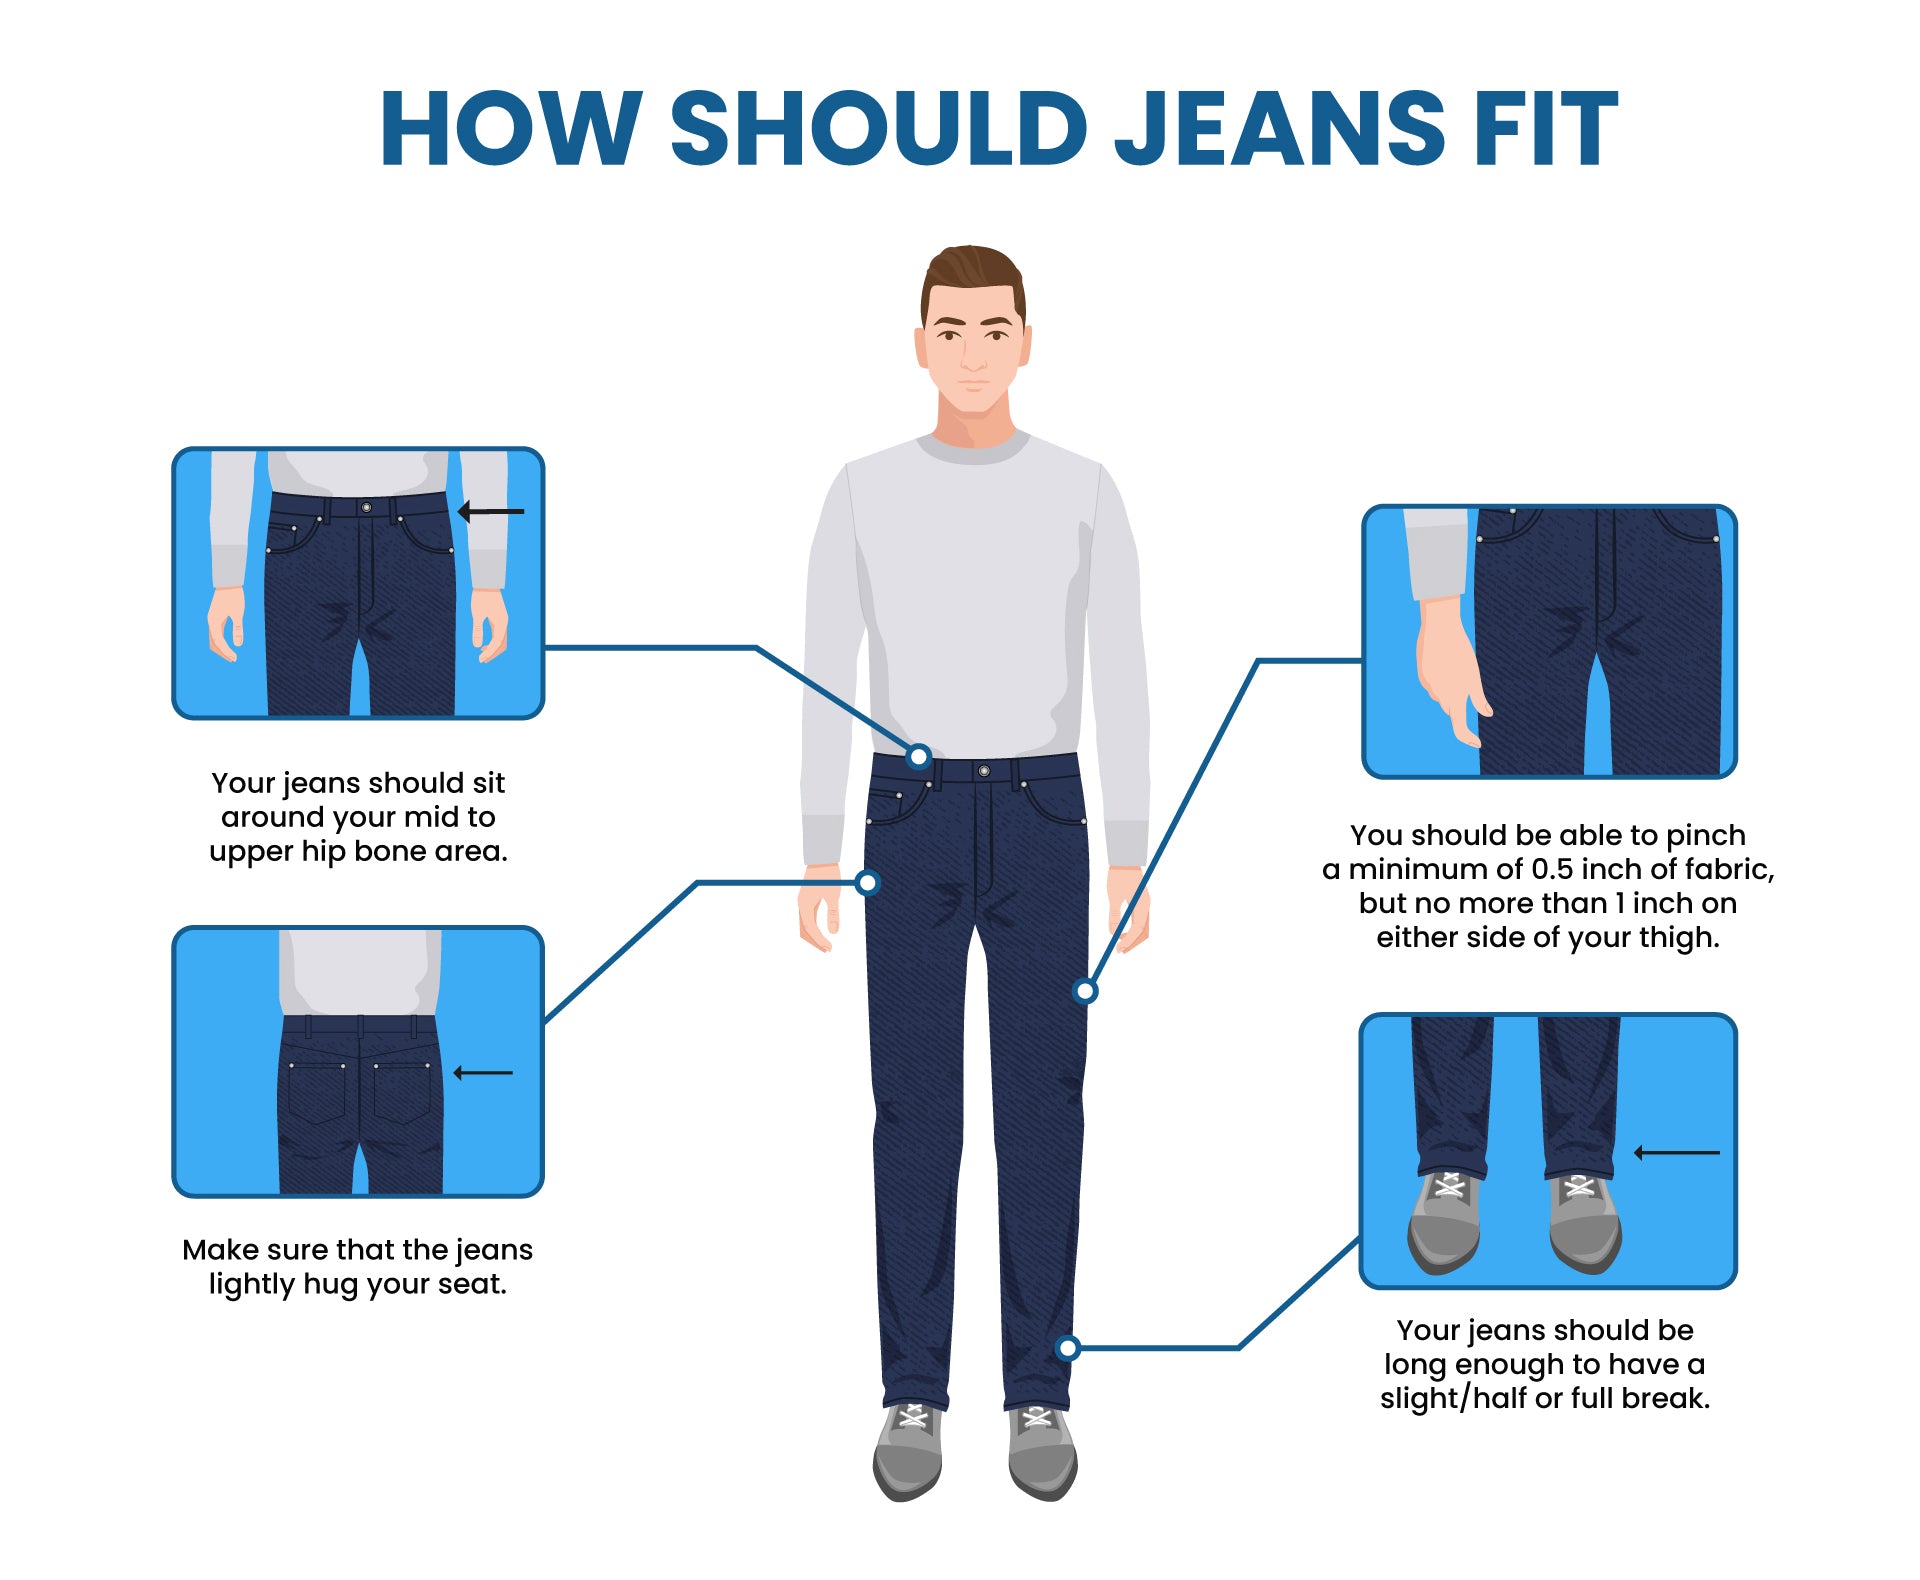 How Should Jeans Fit At The Ankle?